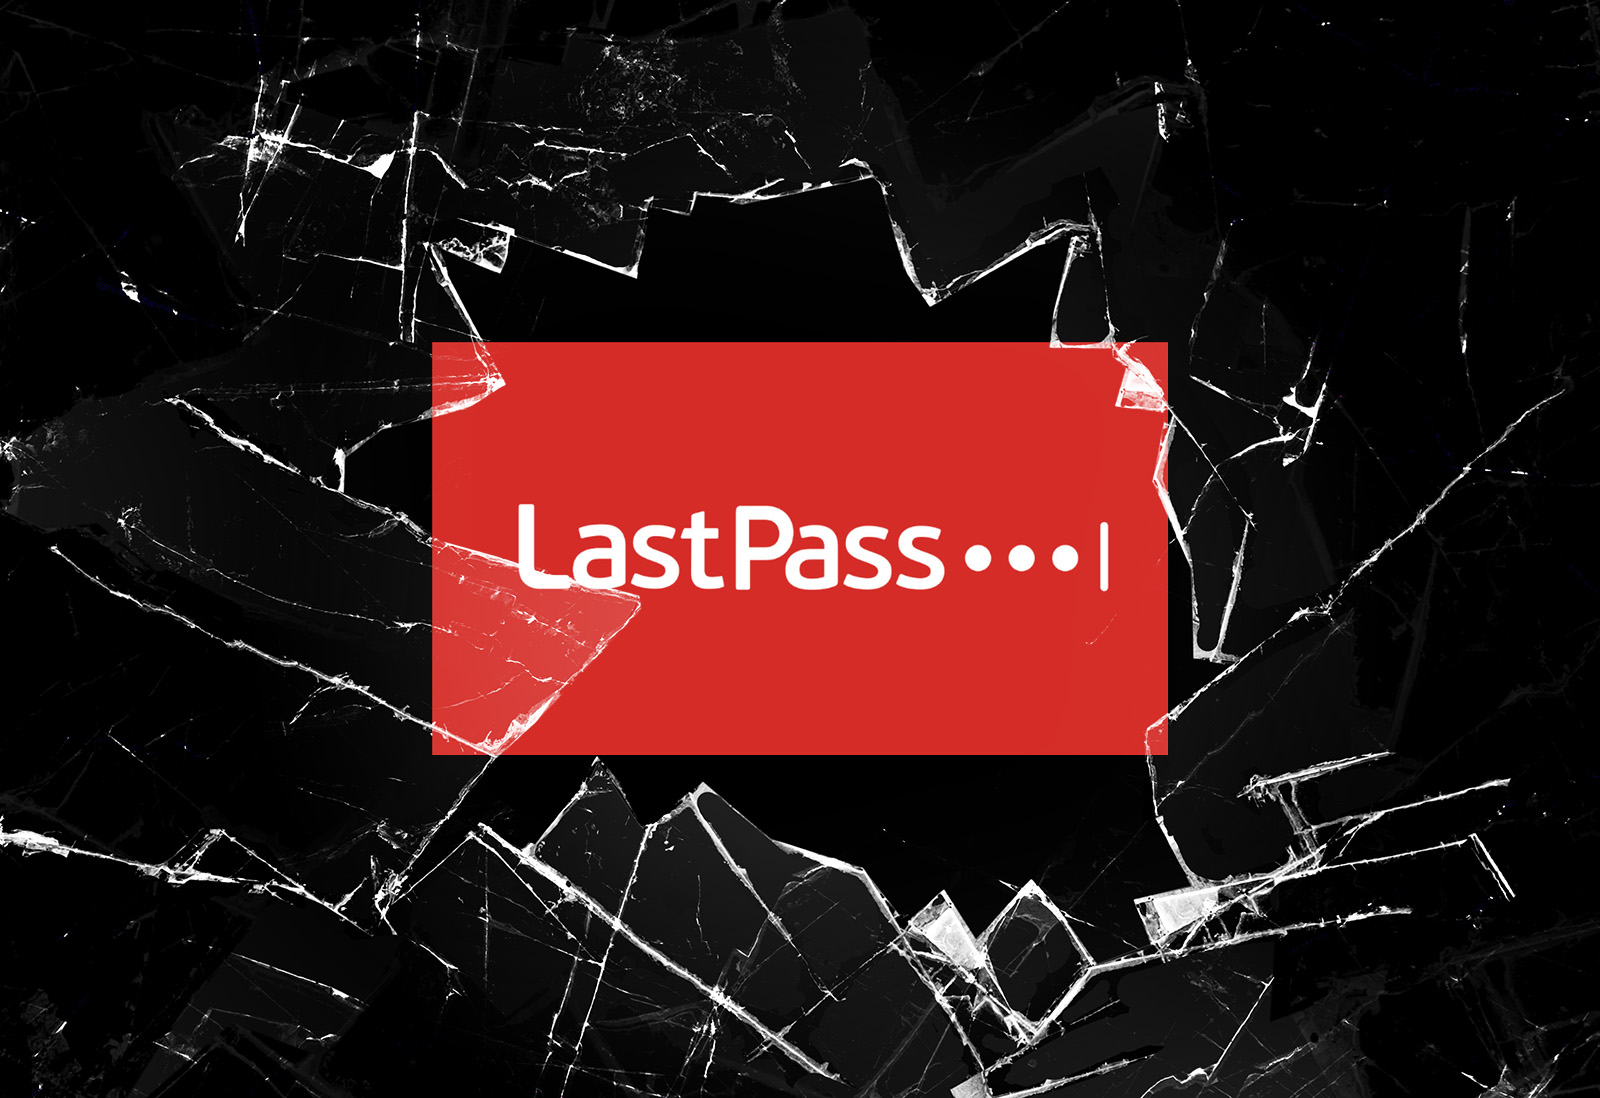 LastPass says attackers got users' info and password vault data